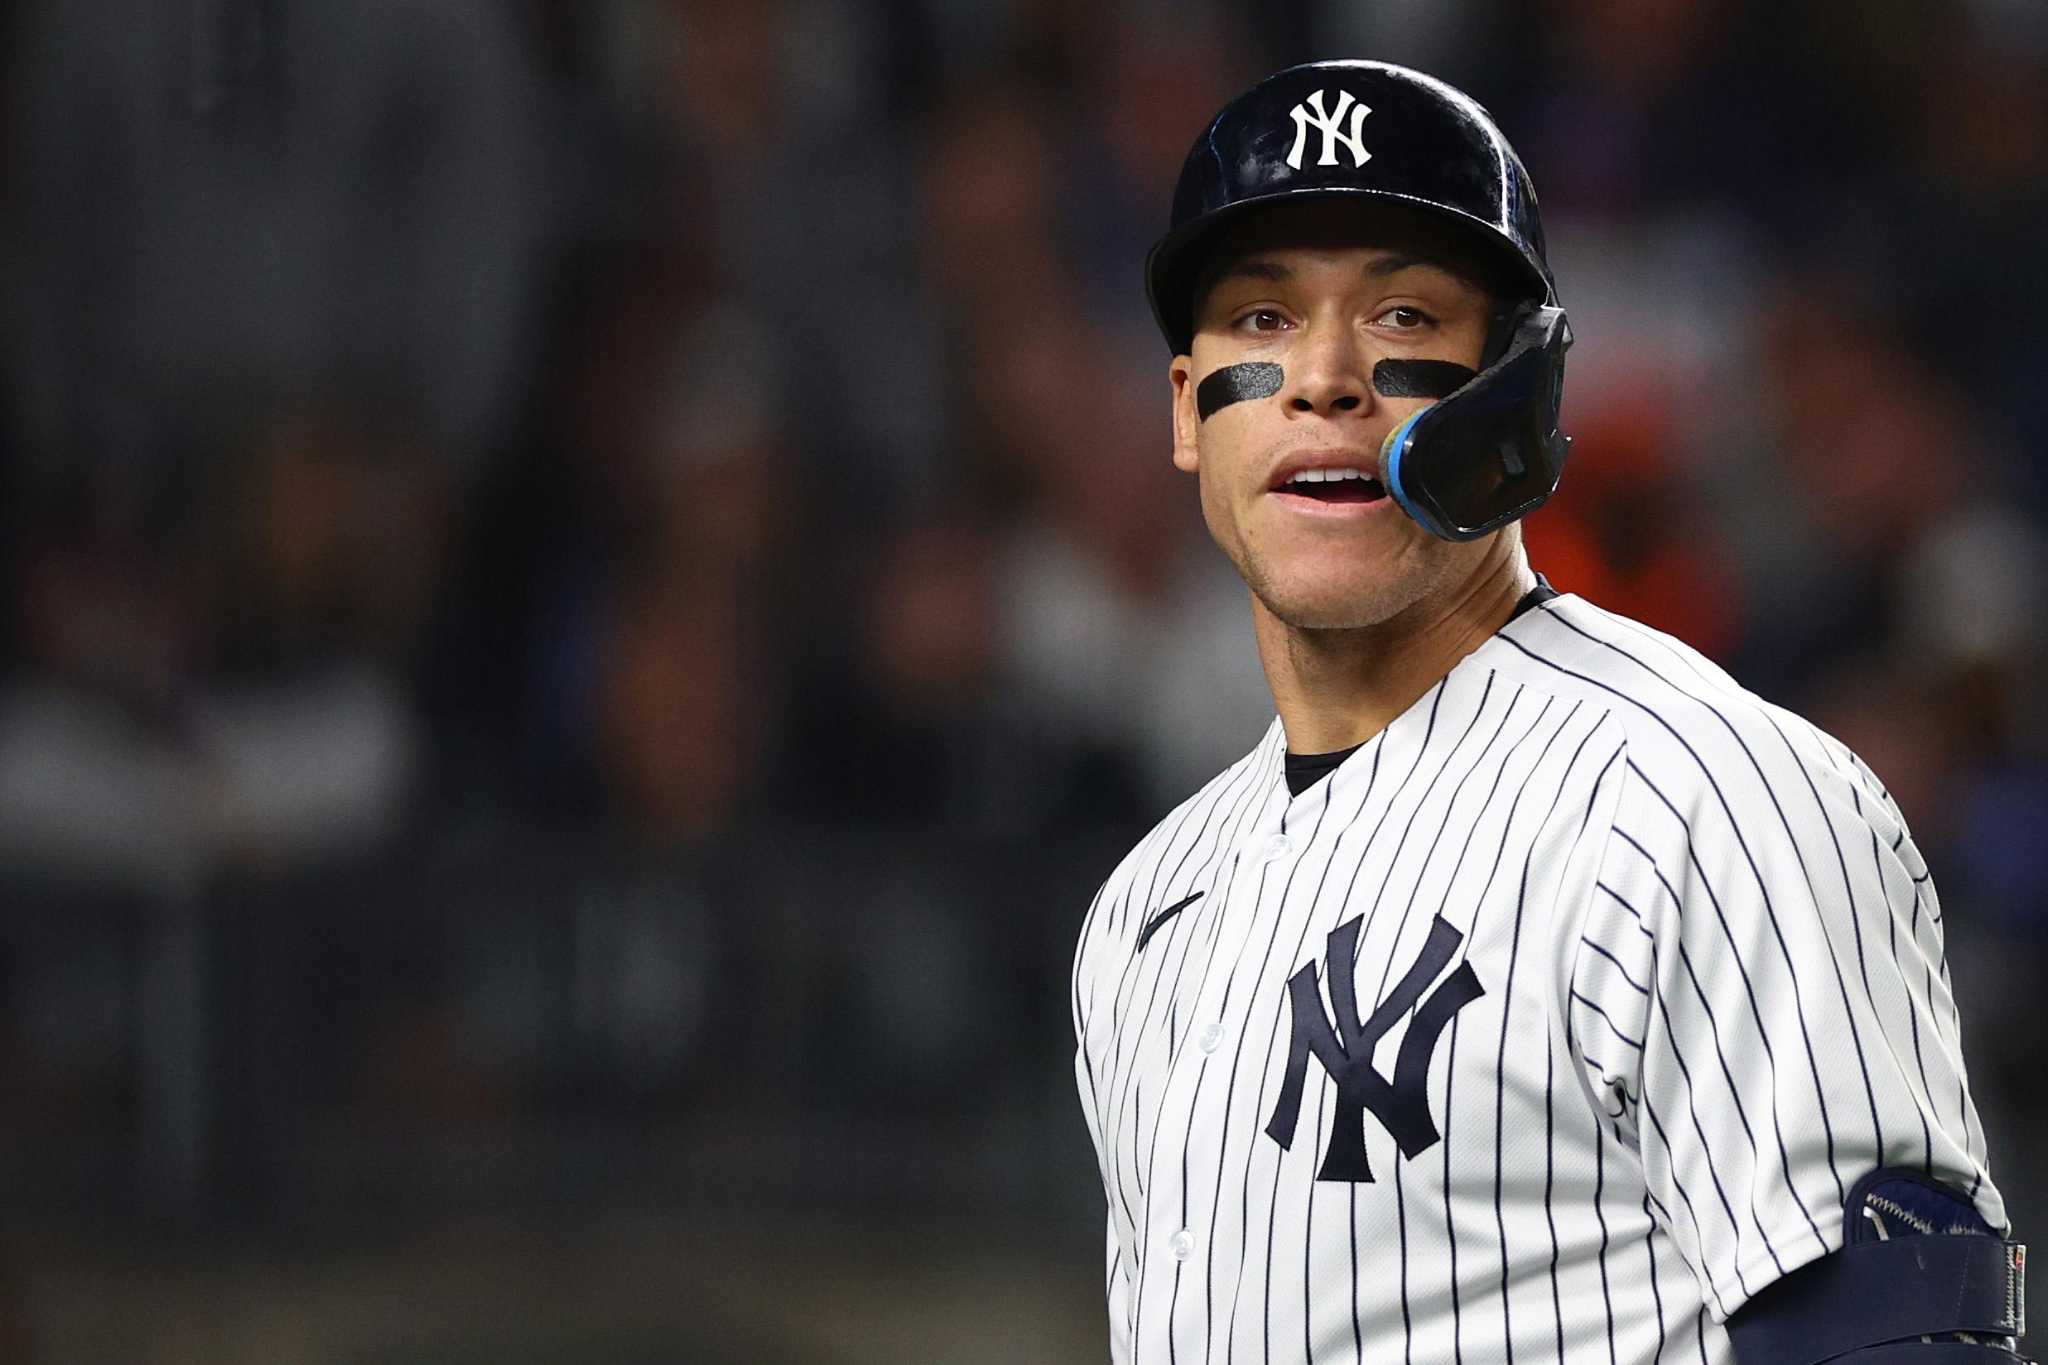 Here are TV and radio calls of Aaron Judge hitting 62nd home run